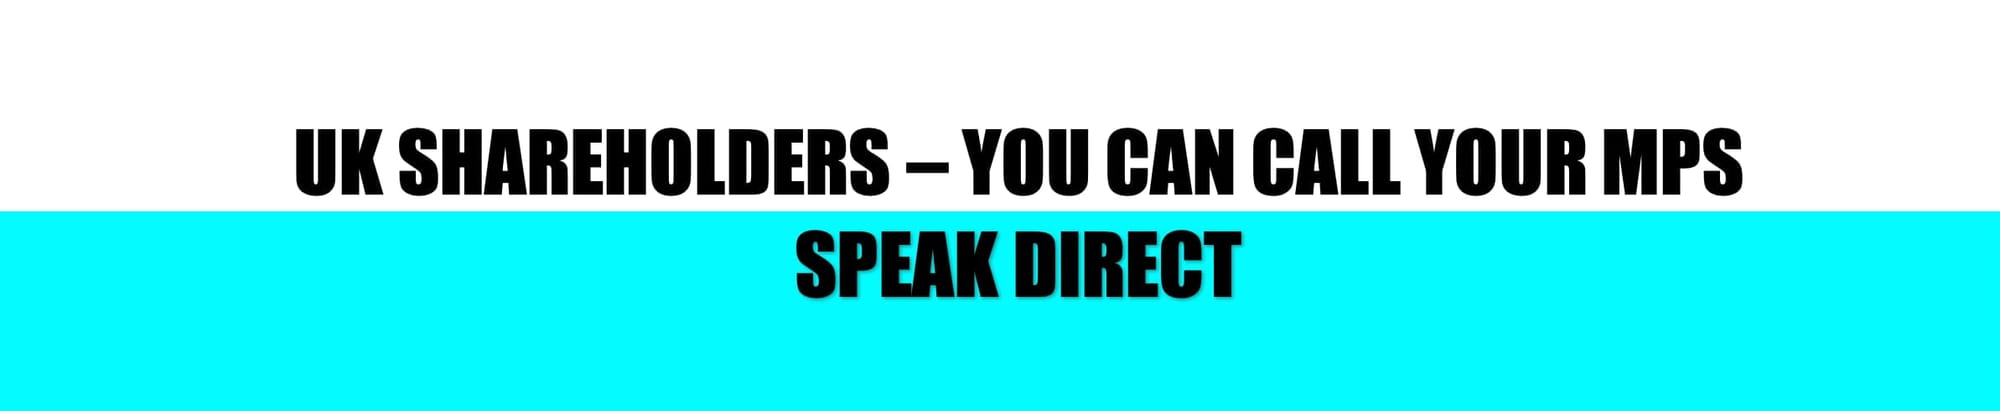 HEADER: UK SHAREHOLDERS - YOU CAN CALL YOUR MPS: SPEAK DIRECT